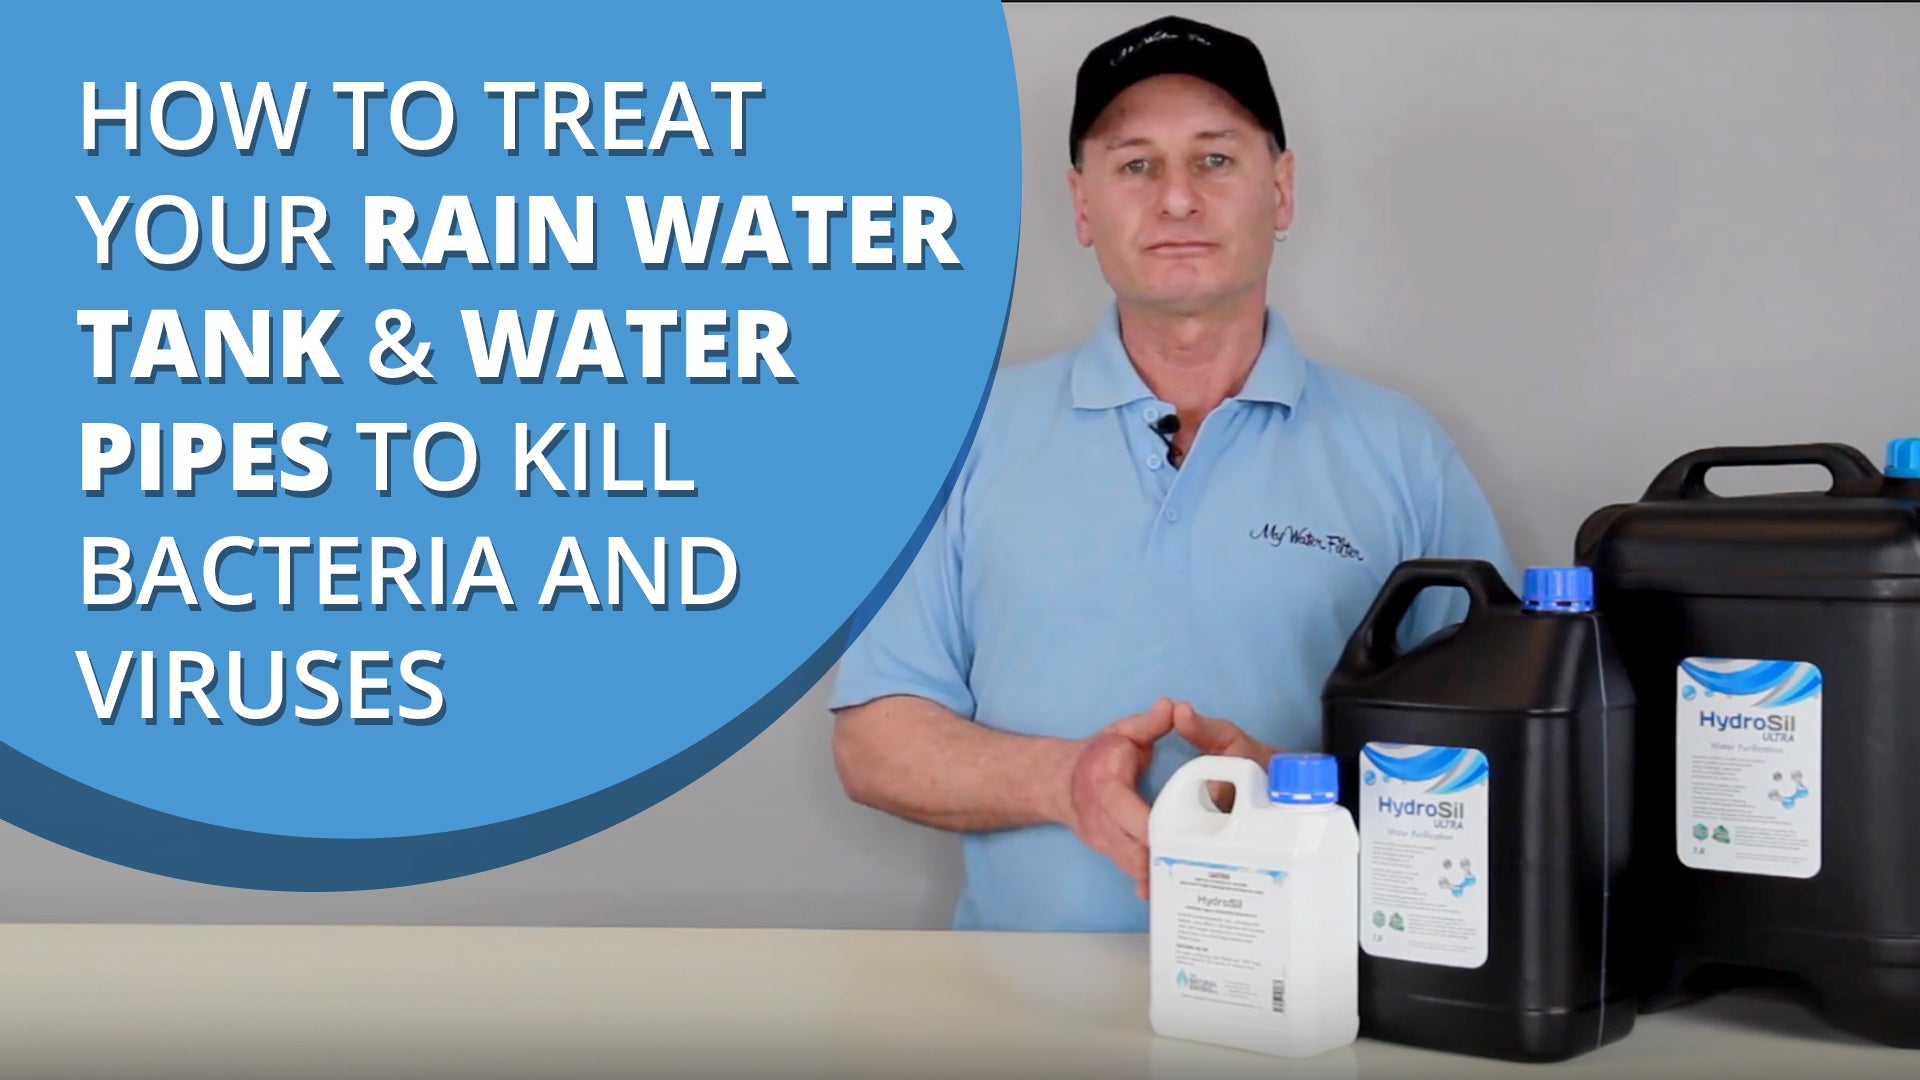 How do you kill bacteria in a water tank? [VIDEO]